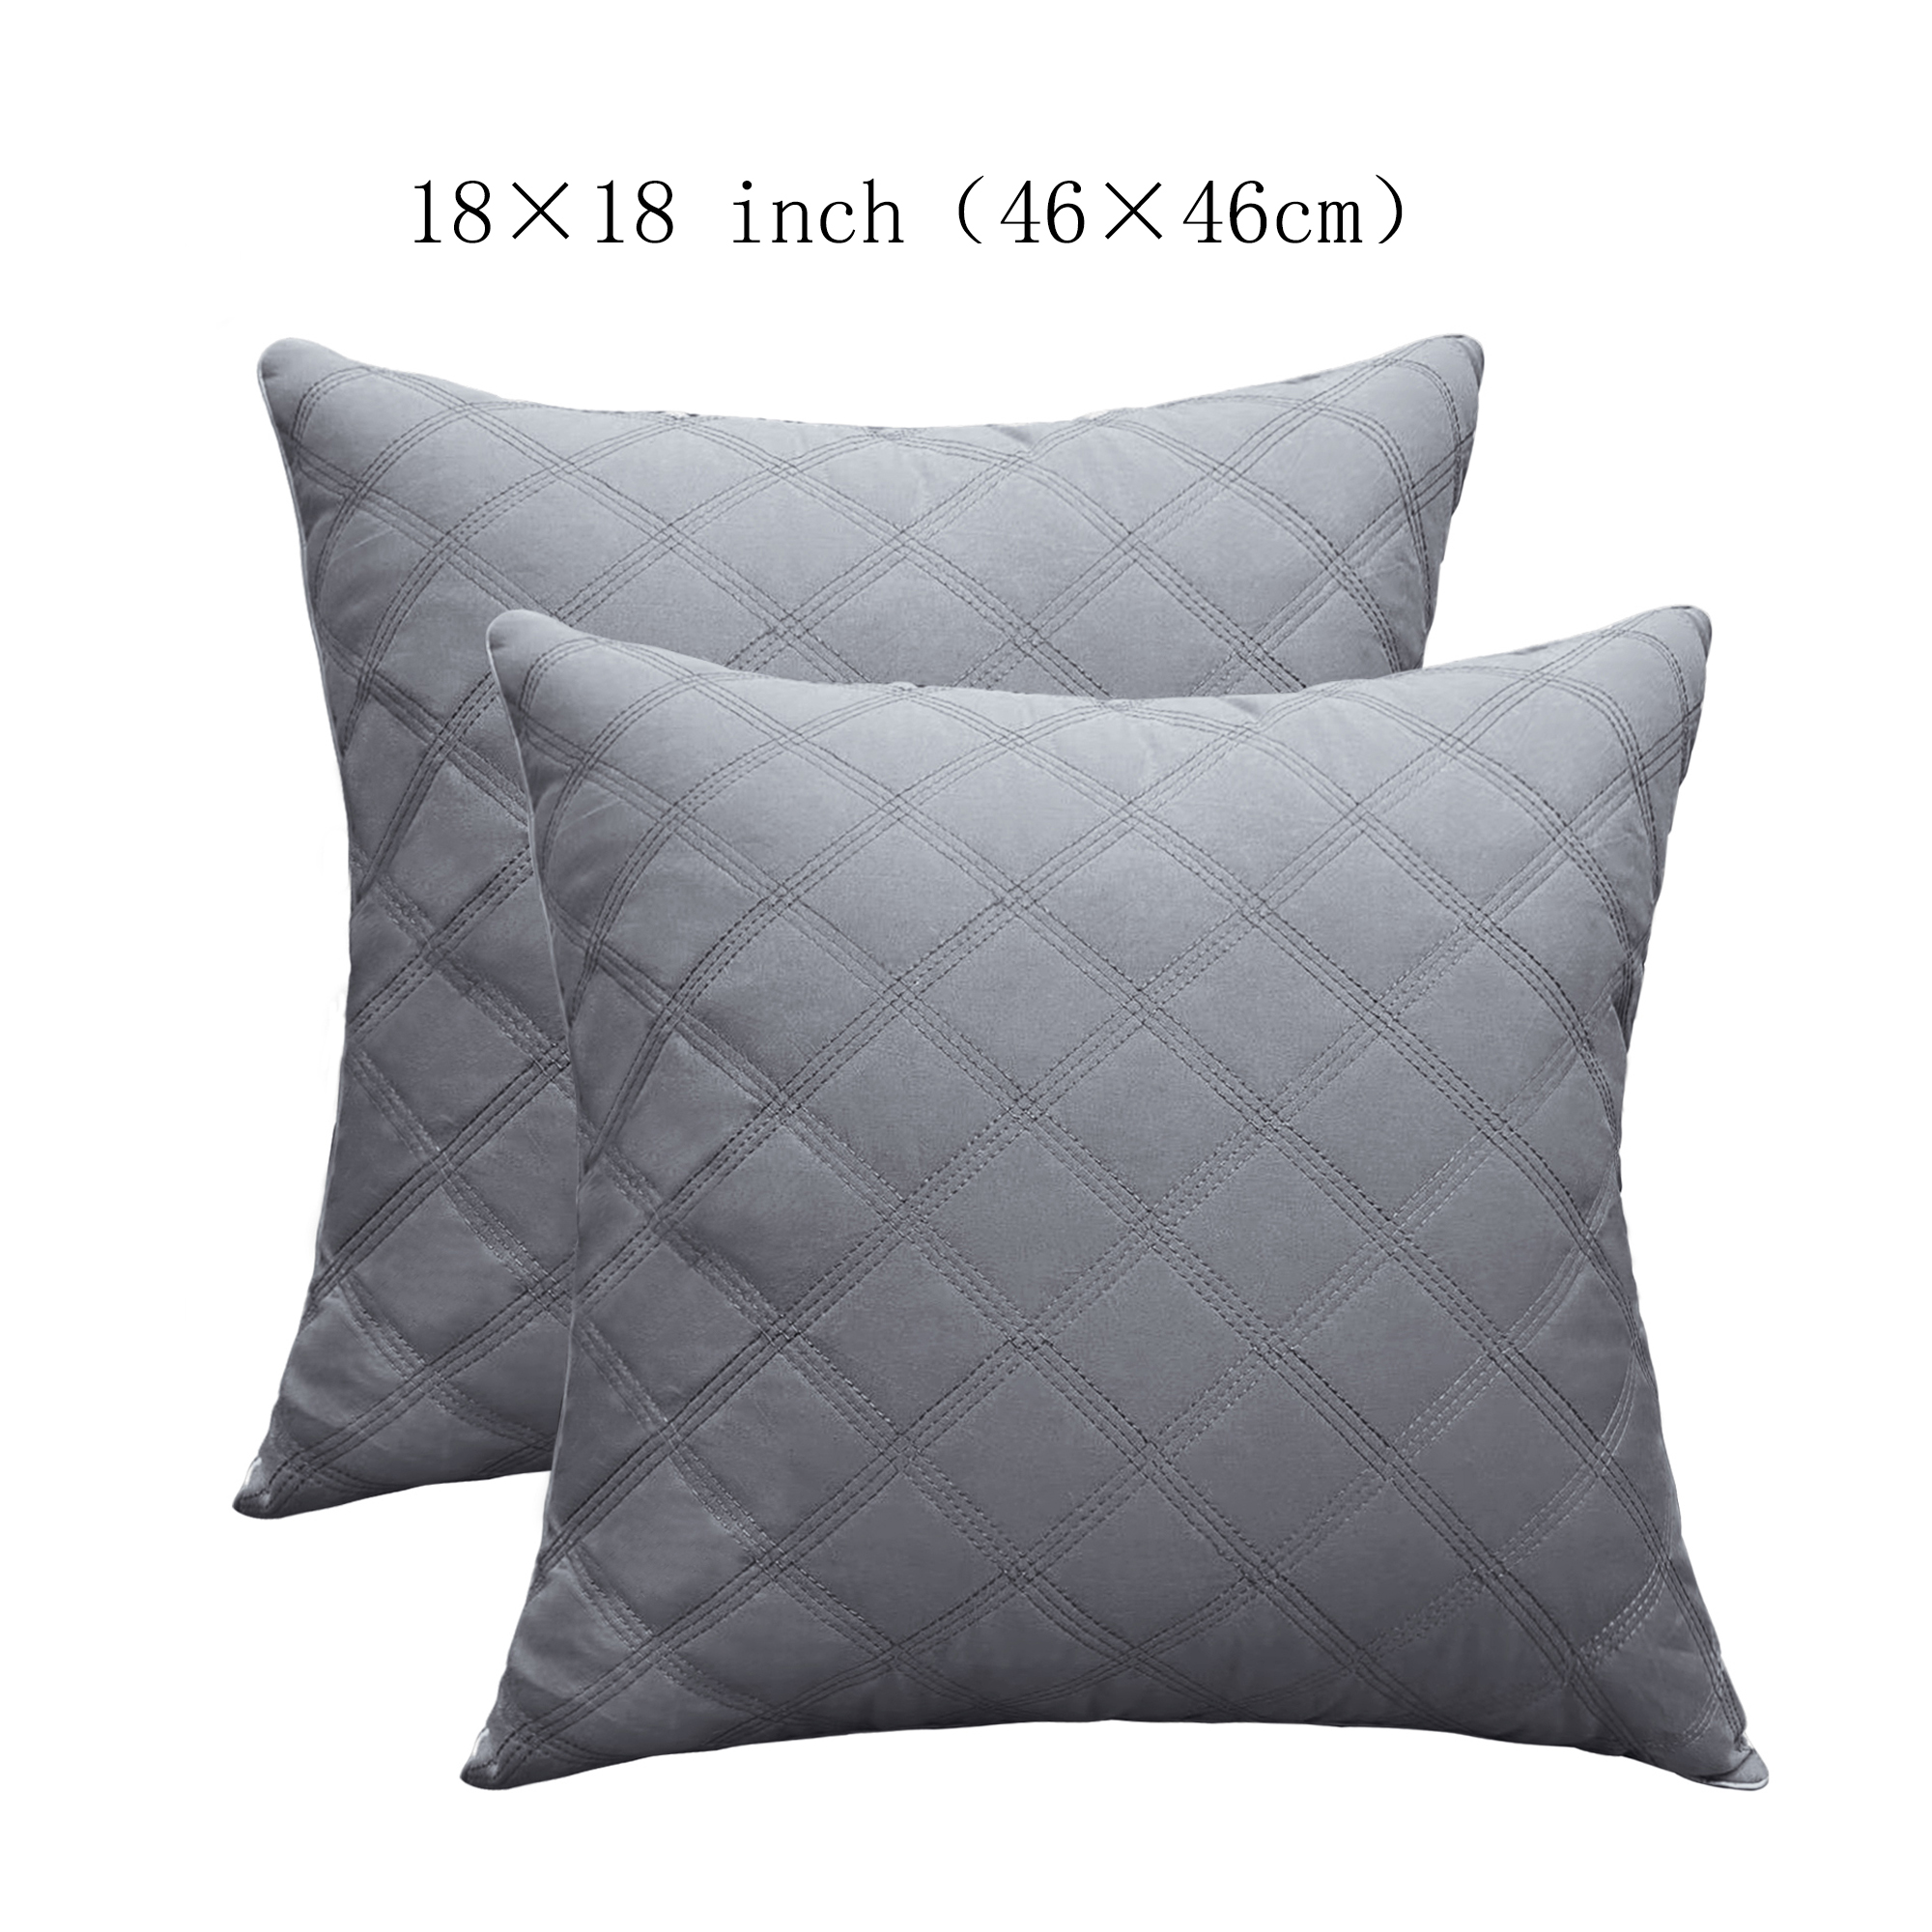 2pcs/set Throw Pillow Inserts Quilted, Throw Pillows Hypoallergenic - Bedding  Square Pillows Luxury Decorative for Couch Bed Office Hotel